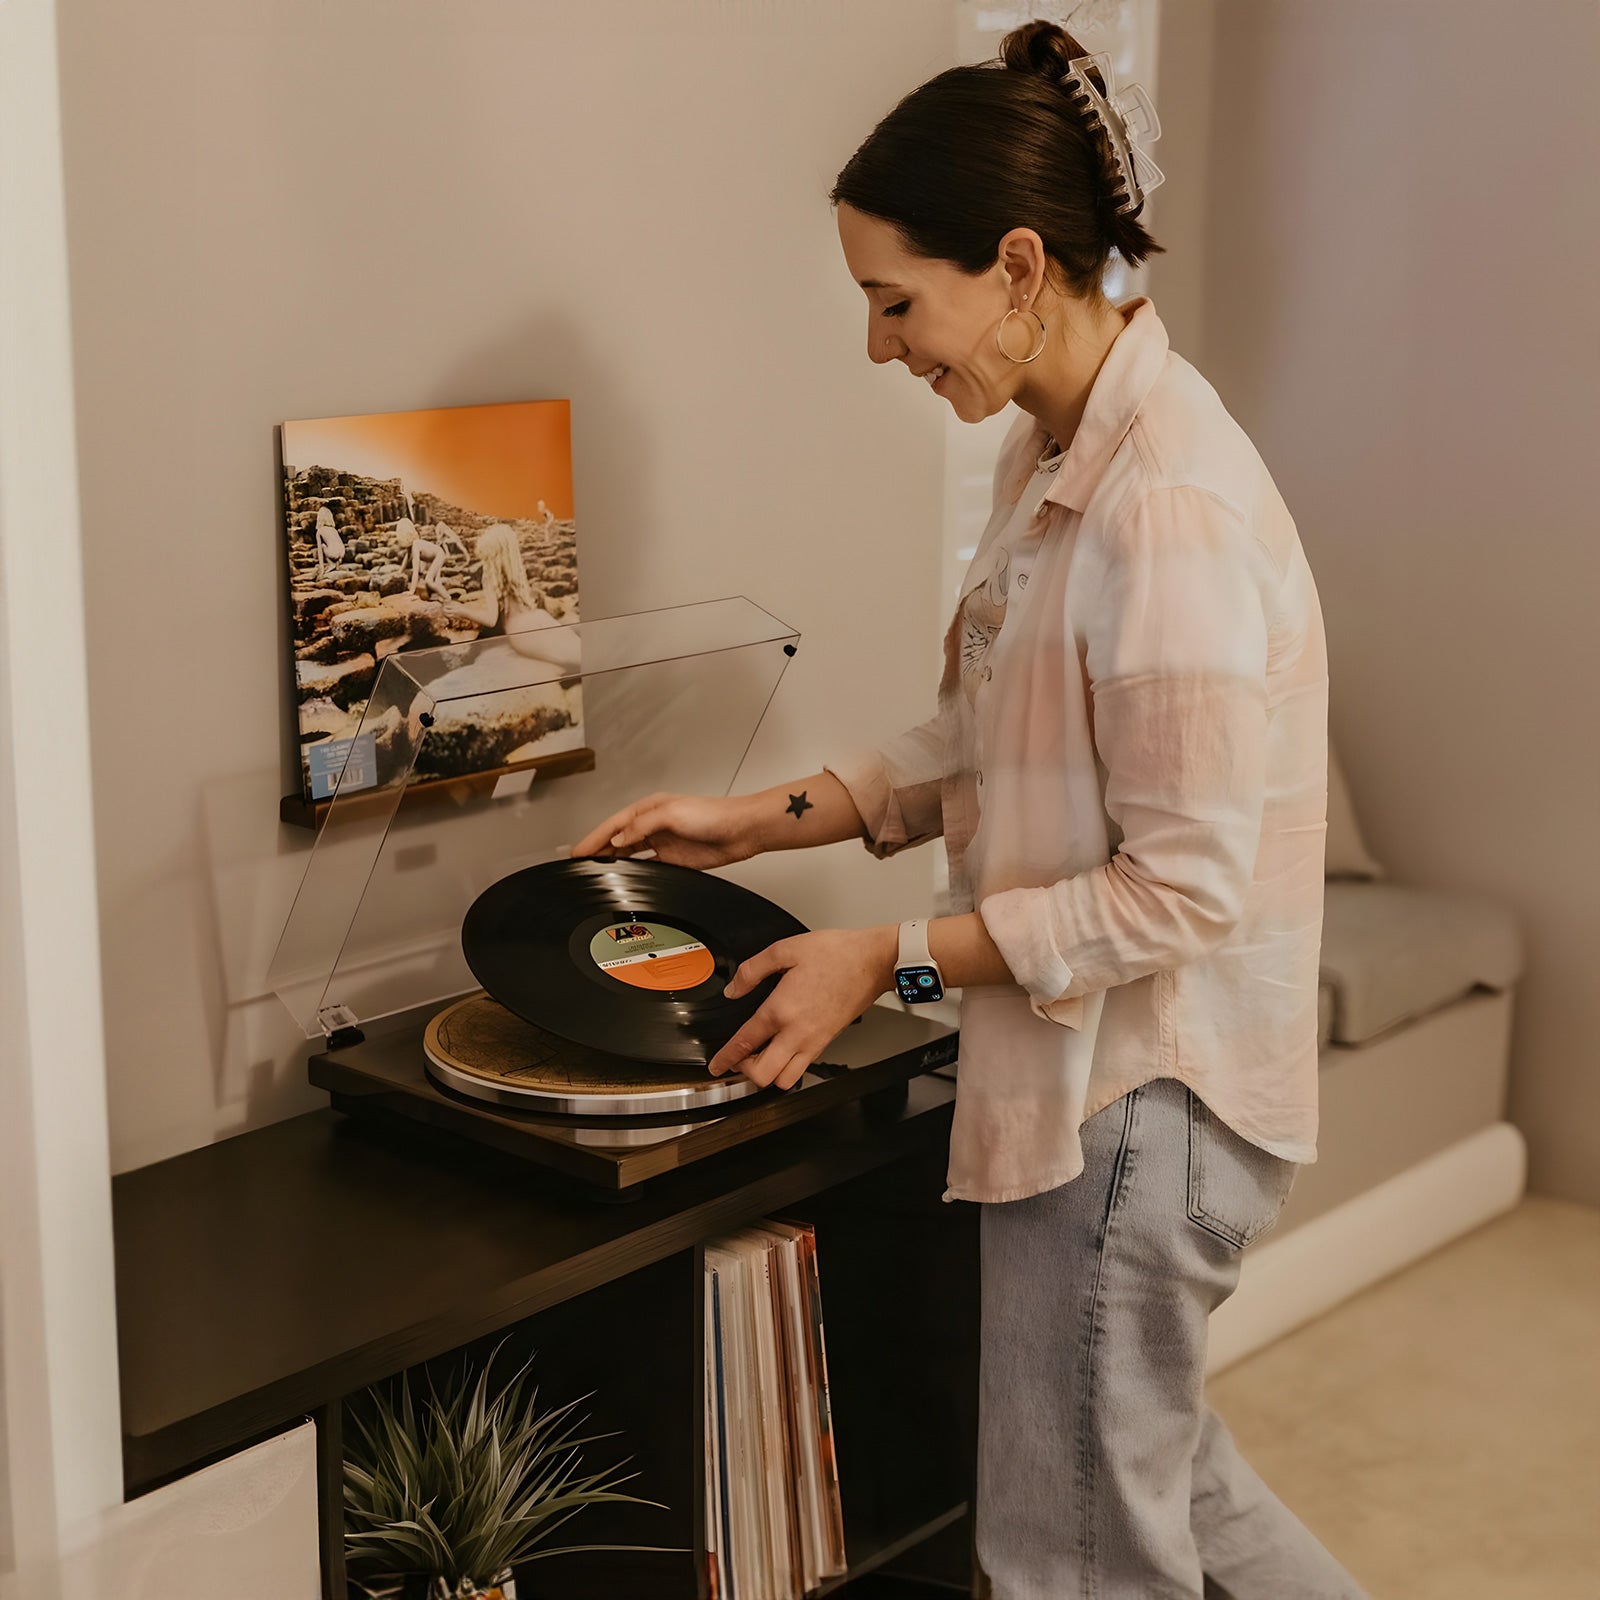 HQKZ-006 the Classic Bluetooth Vinyl Turntable with High Fidelity Sound